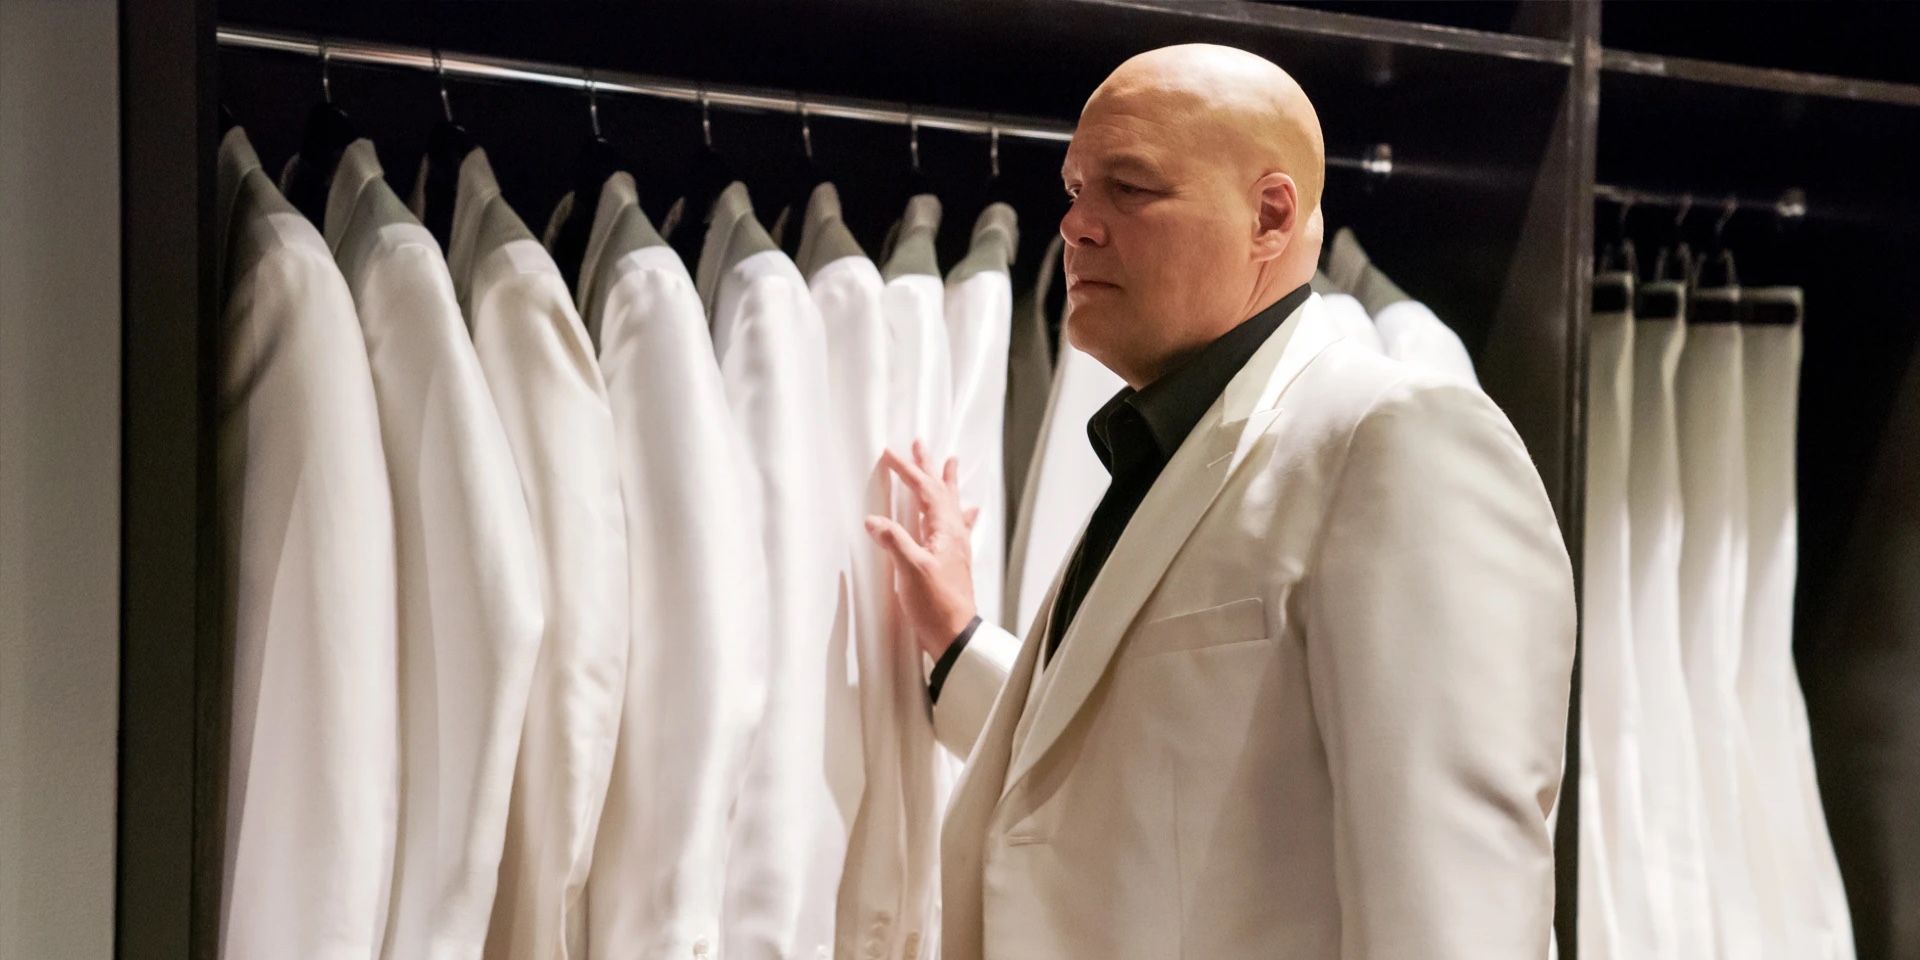 Wilson Fisk looks at his white suits in Daredevil